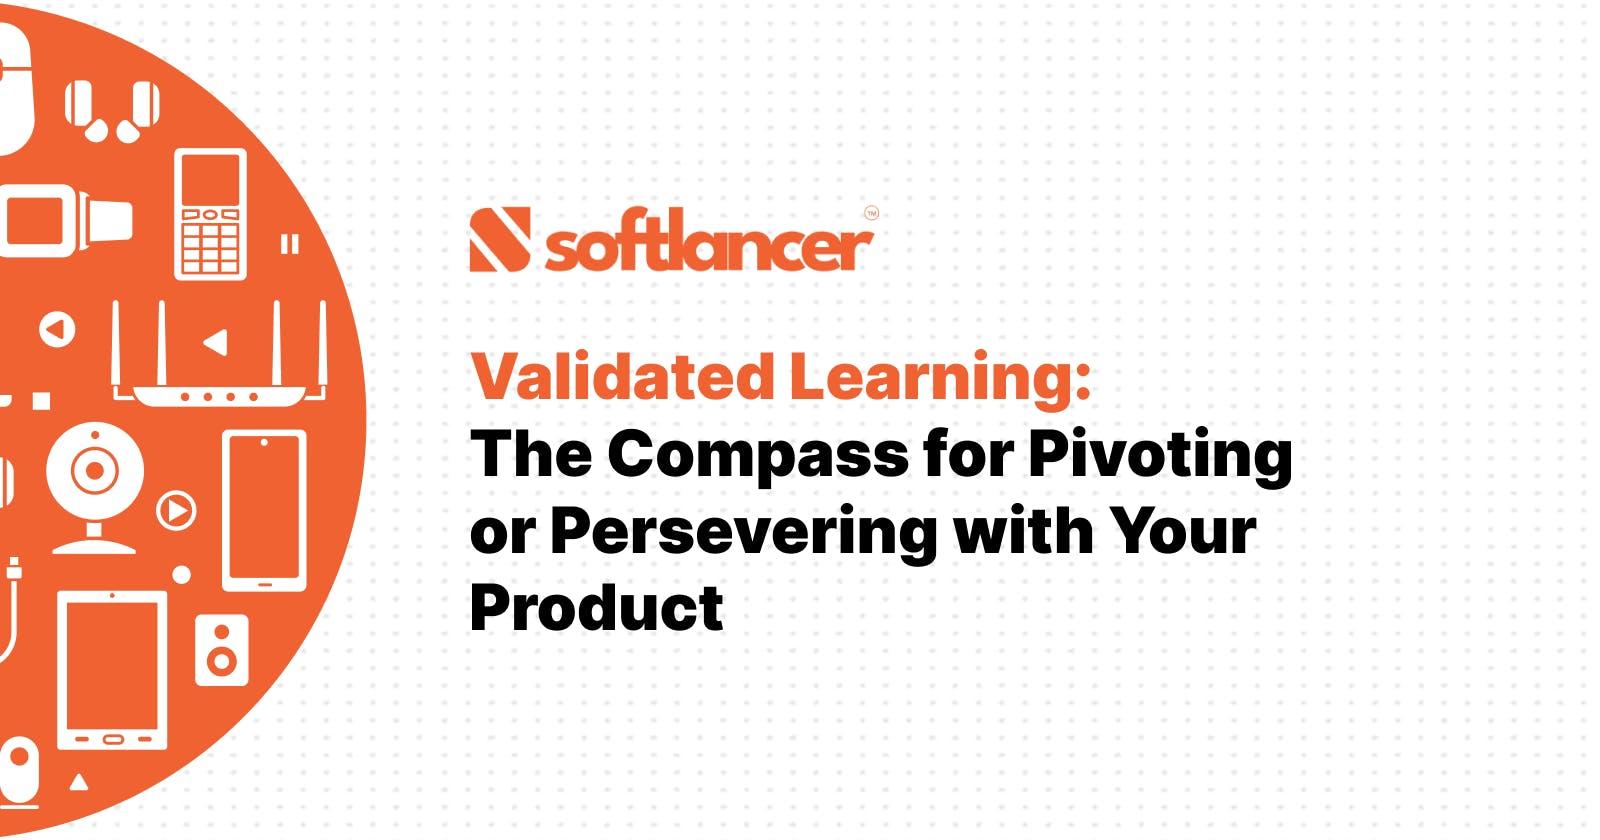 Validated Learning: The Compass for Pivoting or Persevering with Your Product